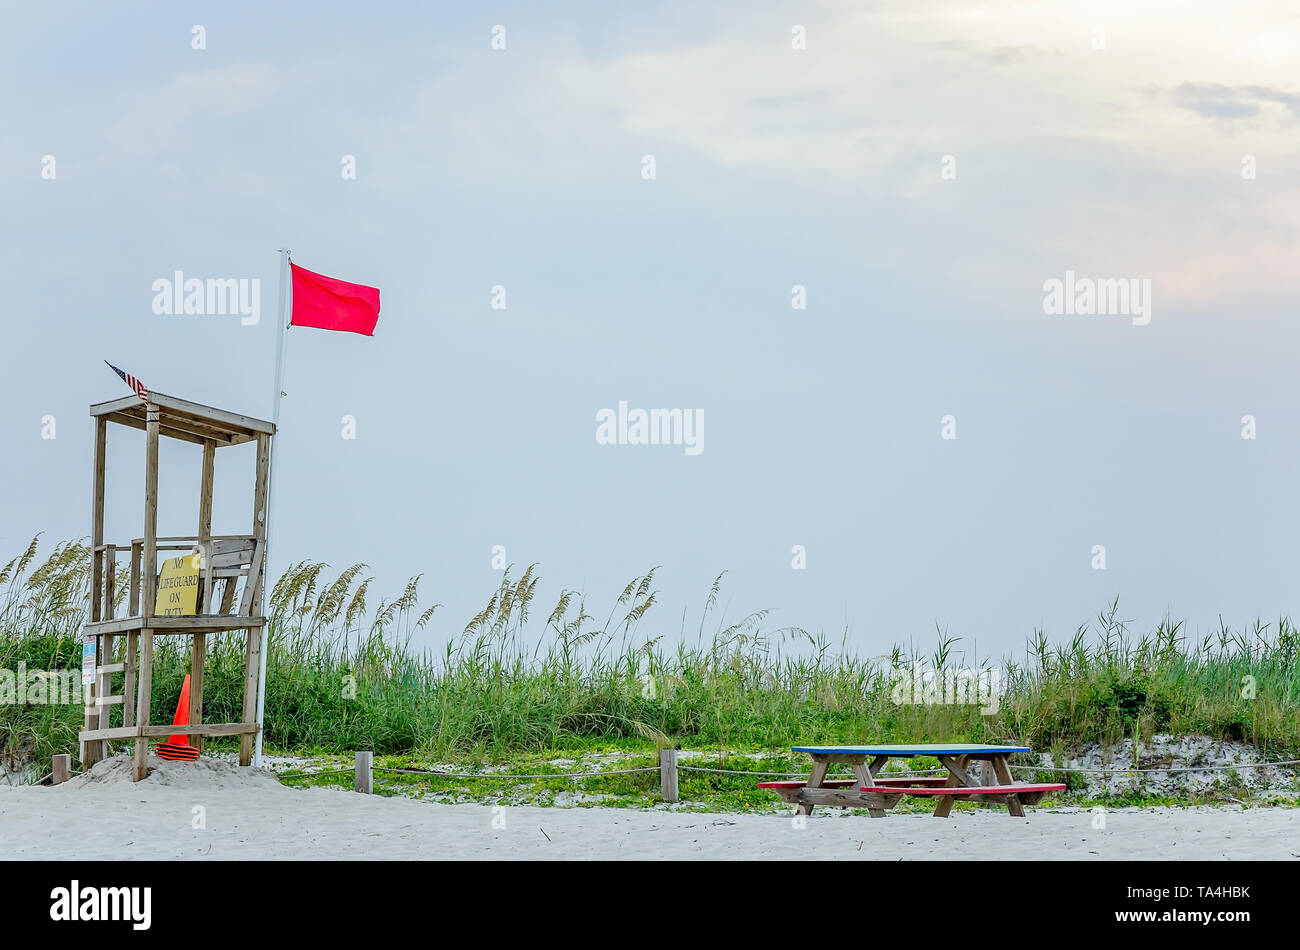 A red flag flies from an empty lifeguard stand, Aug. 2, 2014, in Dauphin Island, Alabama. The red flag signifies hazardous conditions like rough surf. Stock Photo